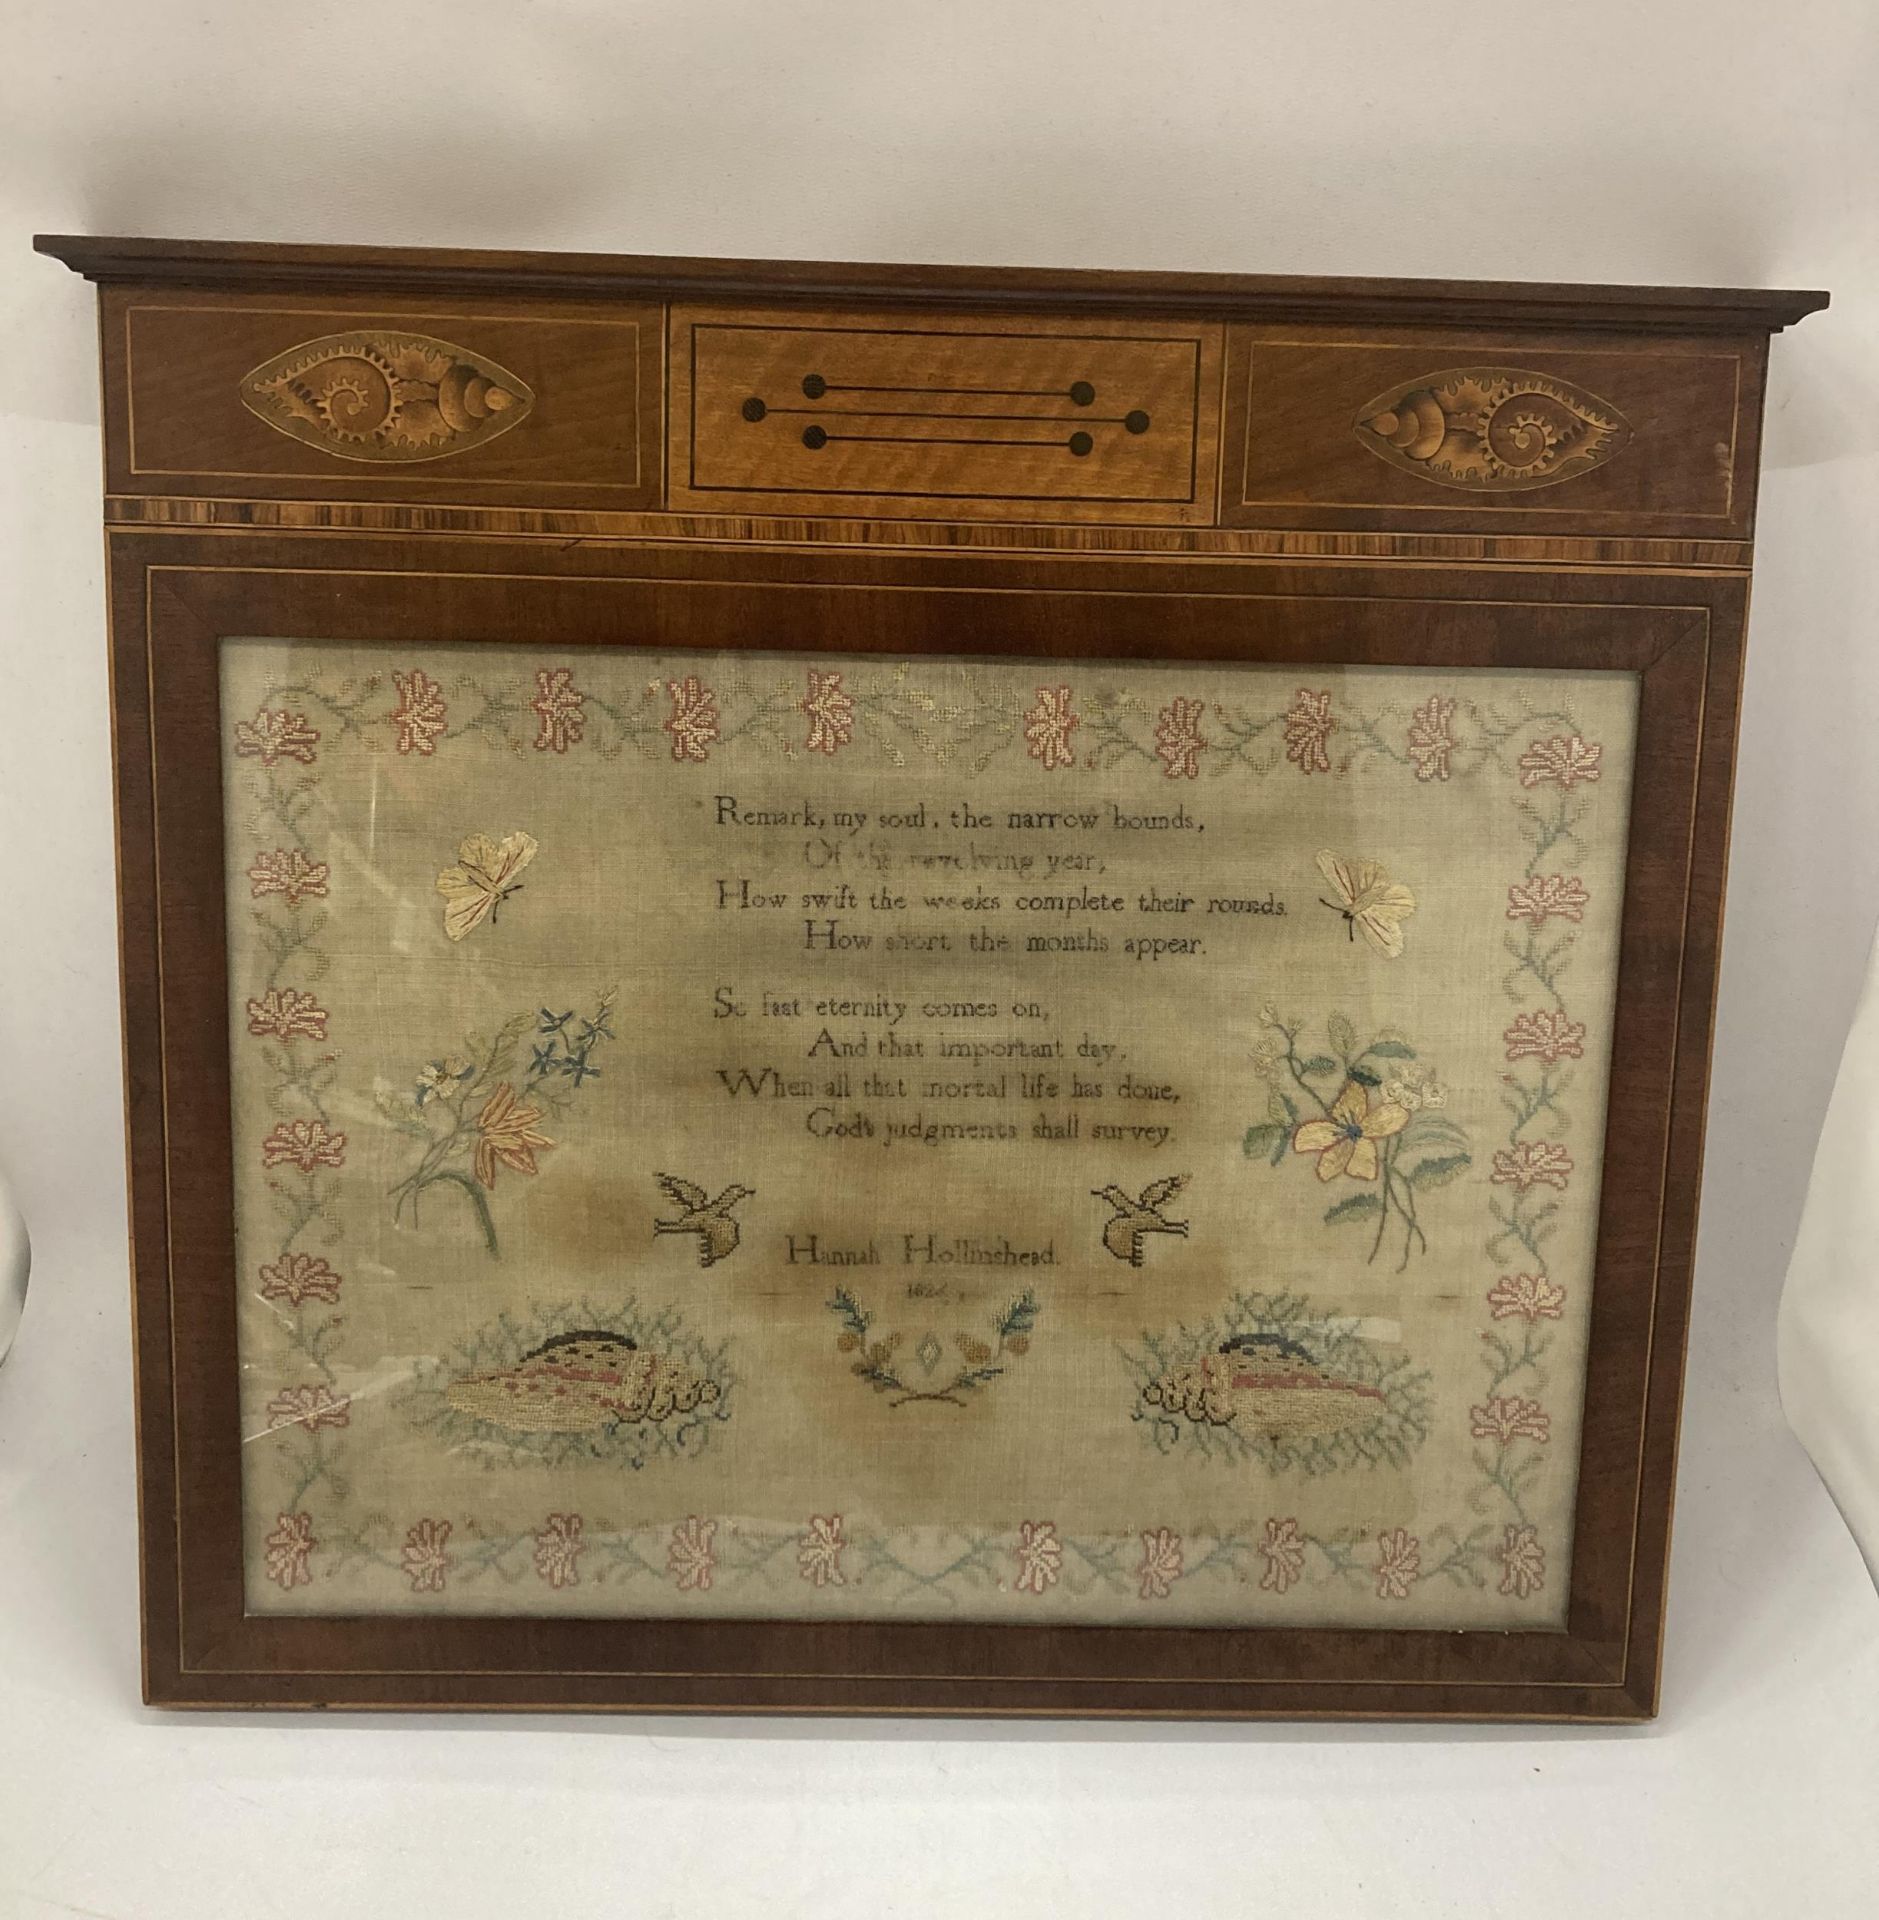 A GEORGIAN POEM TAPESTRY DATED 1826 IN INLAID MAHOGANY FRAME WITH CONCH SHELL DESIGN